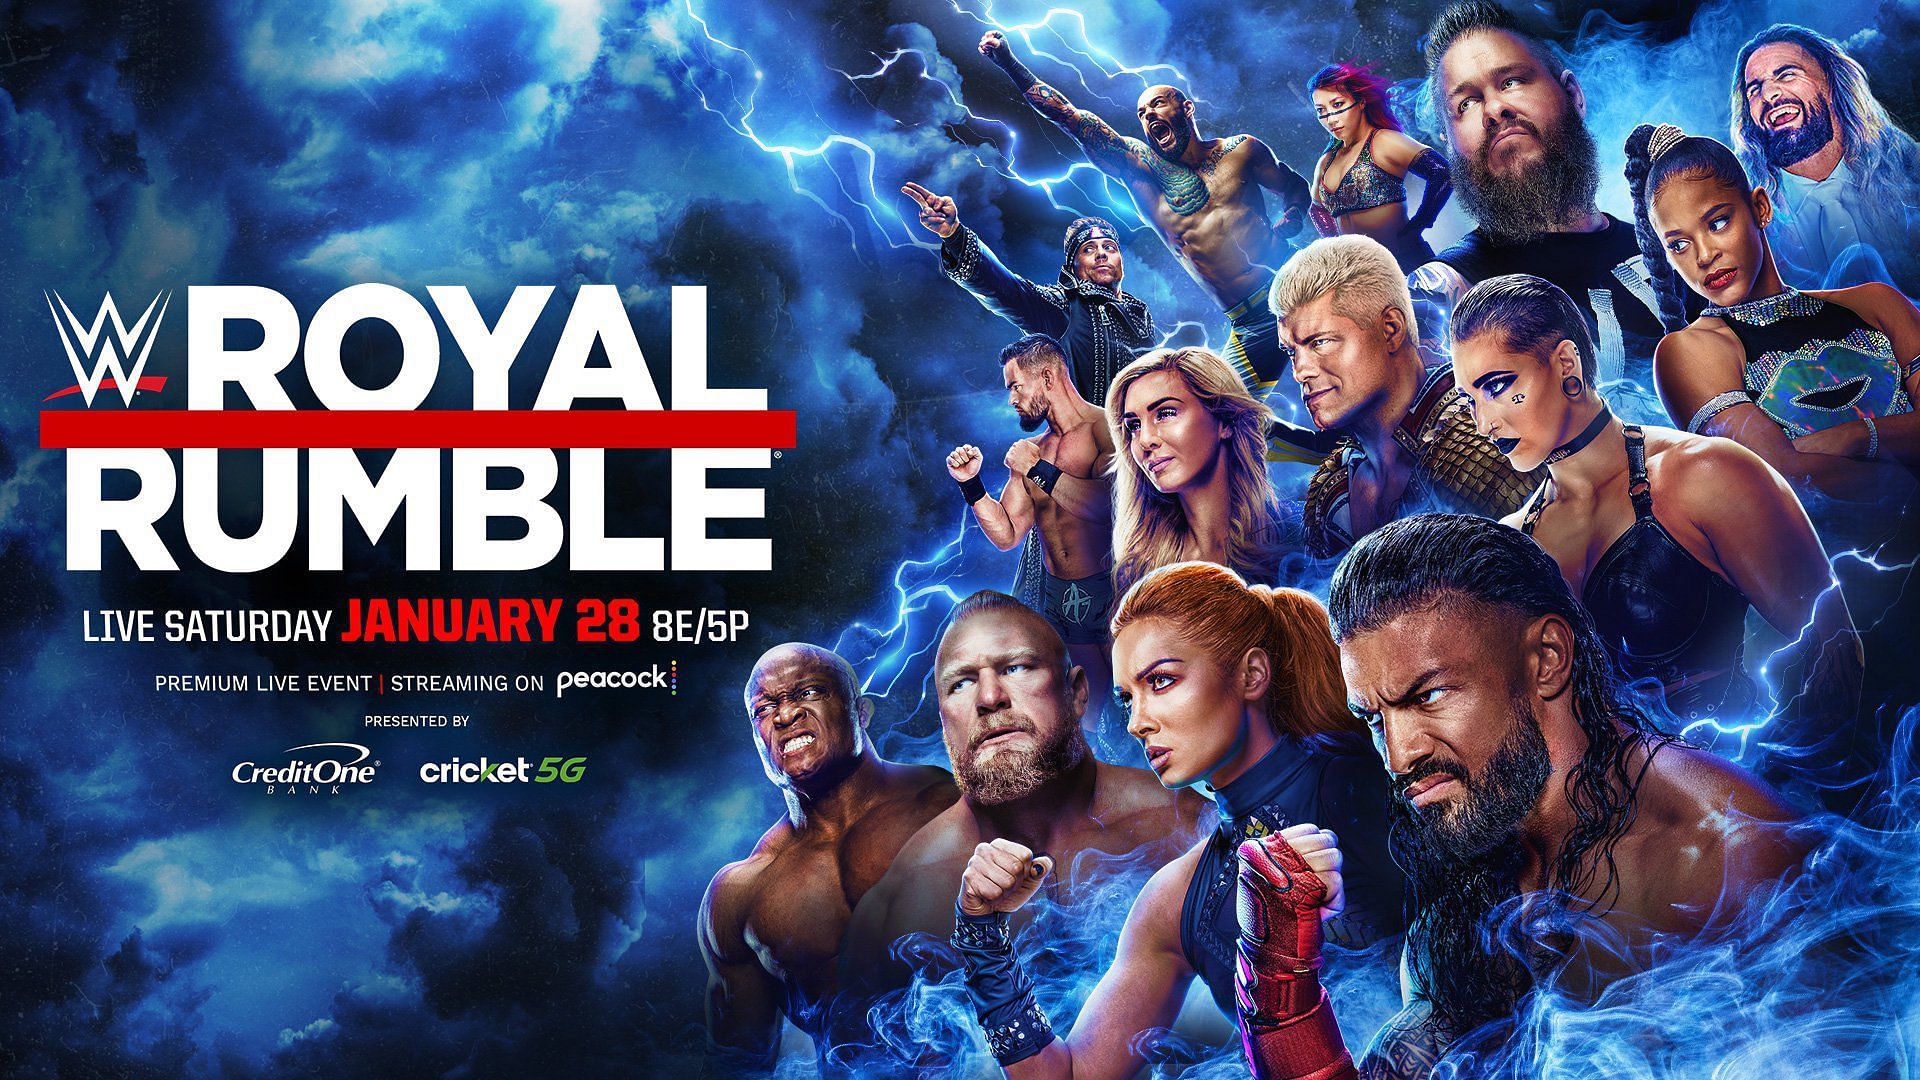 The WWE Royal Rumble 2023 poster